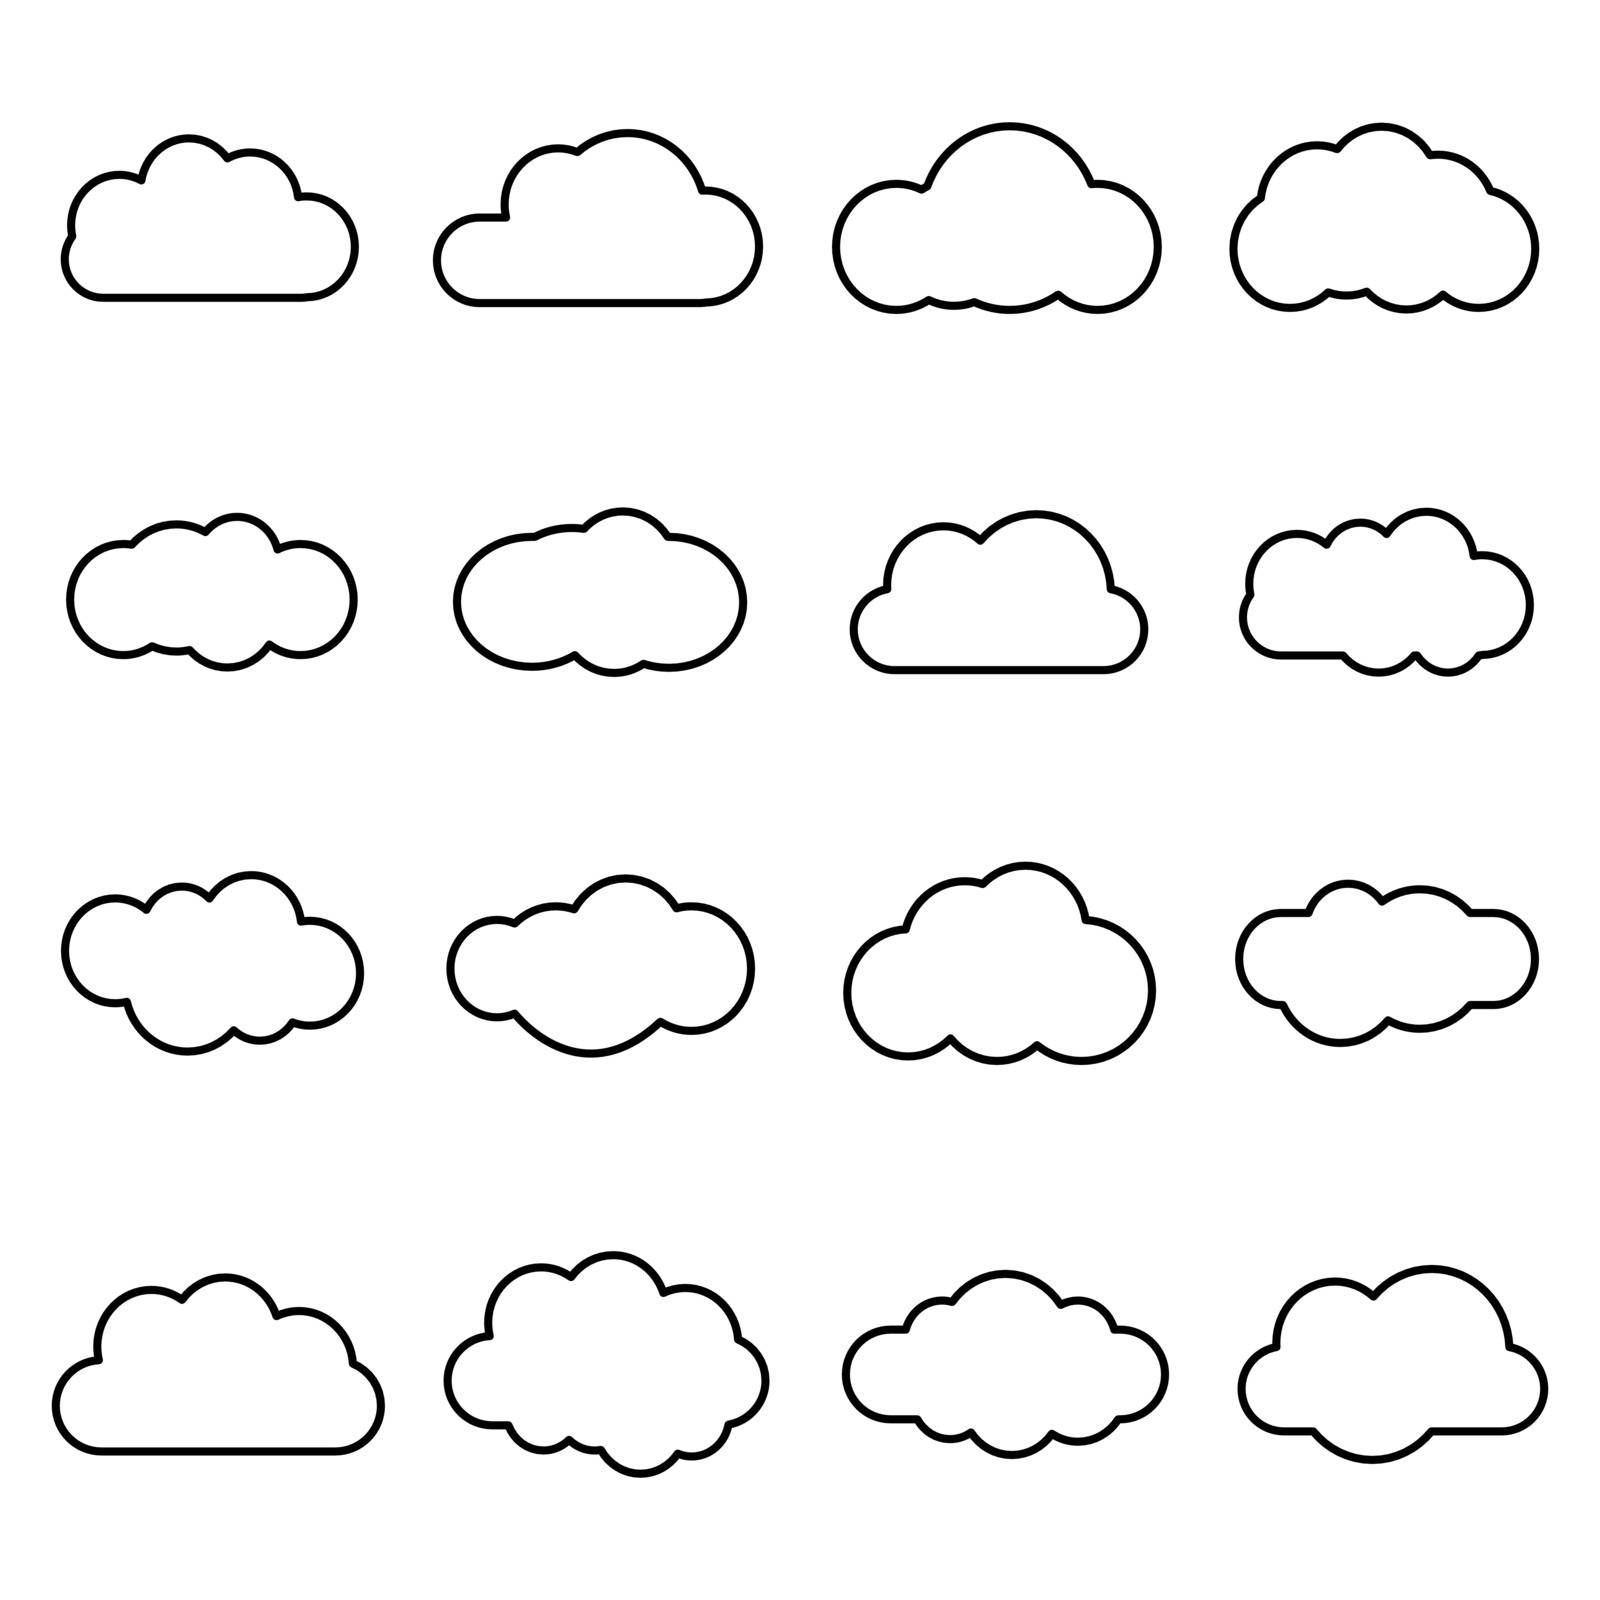 Clouds line art icon isolated on white background. Storage solution element, databases, networking, software image, cloud and meteorology concept by klerik78